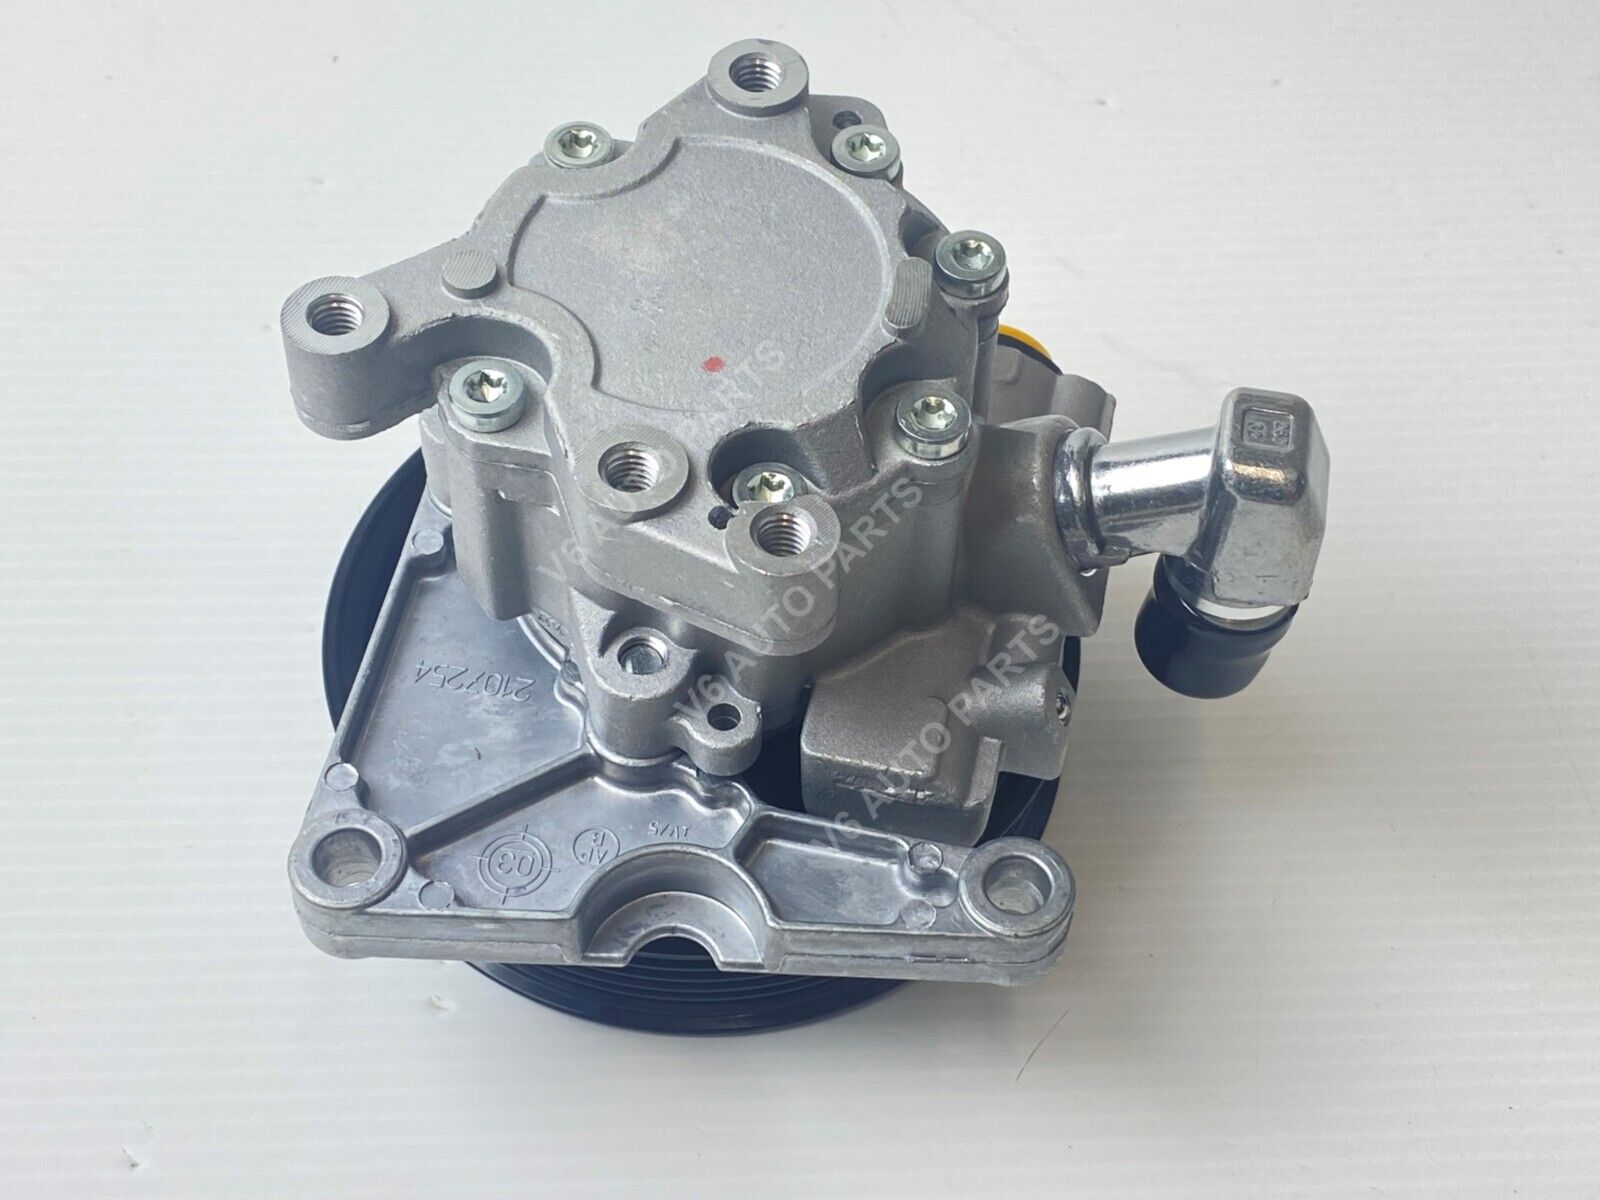 New Mercedes Benz Power Steering Hydraulic Pump For 2006 To 2009 M-Class ML350